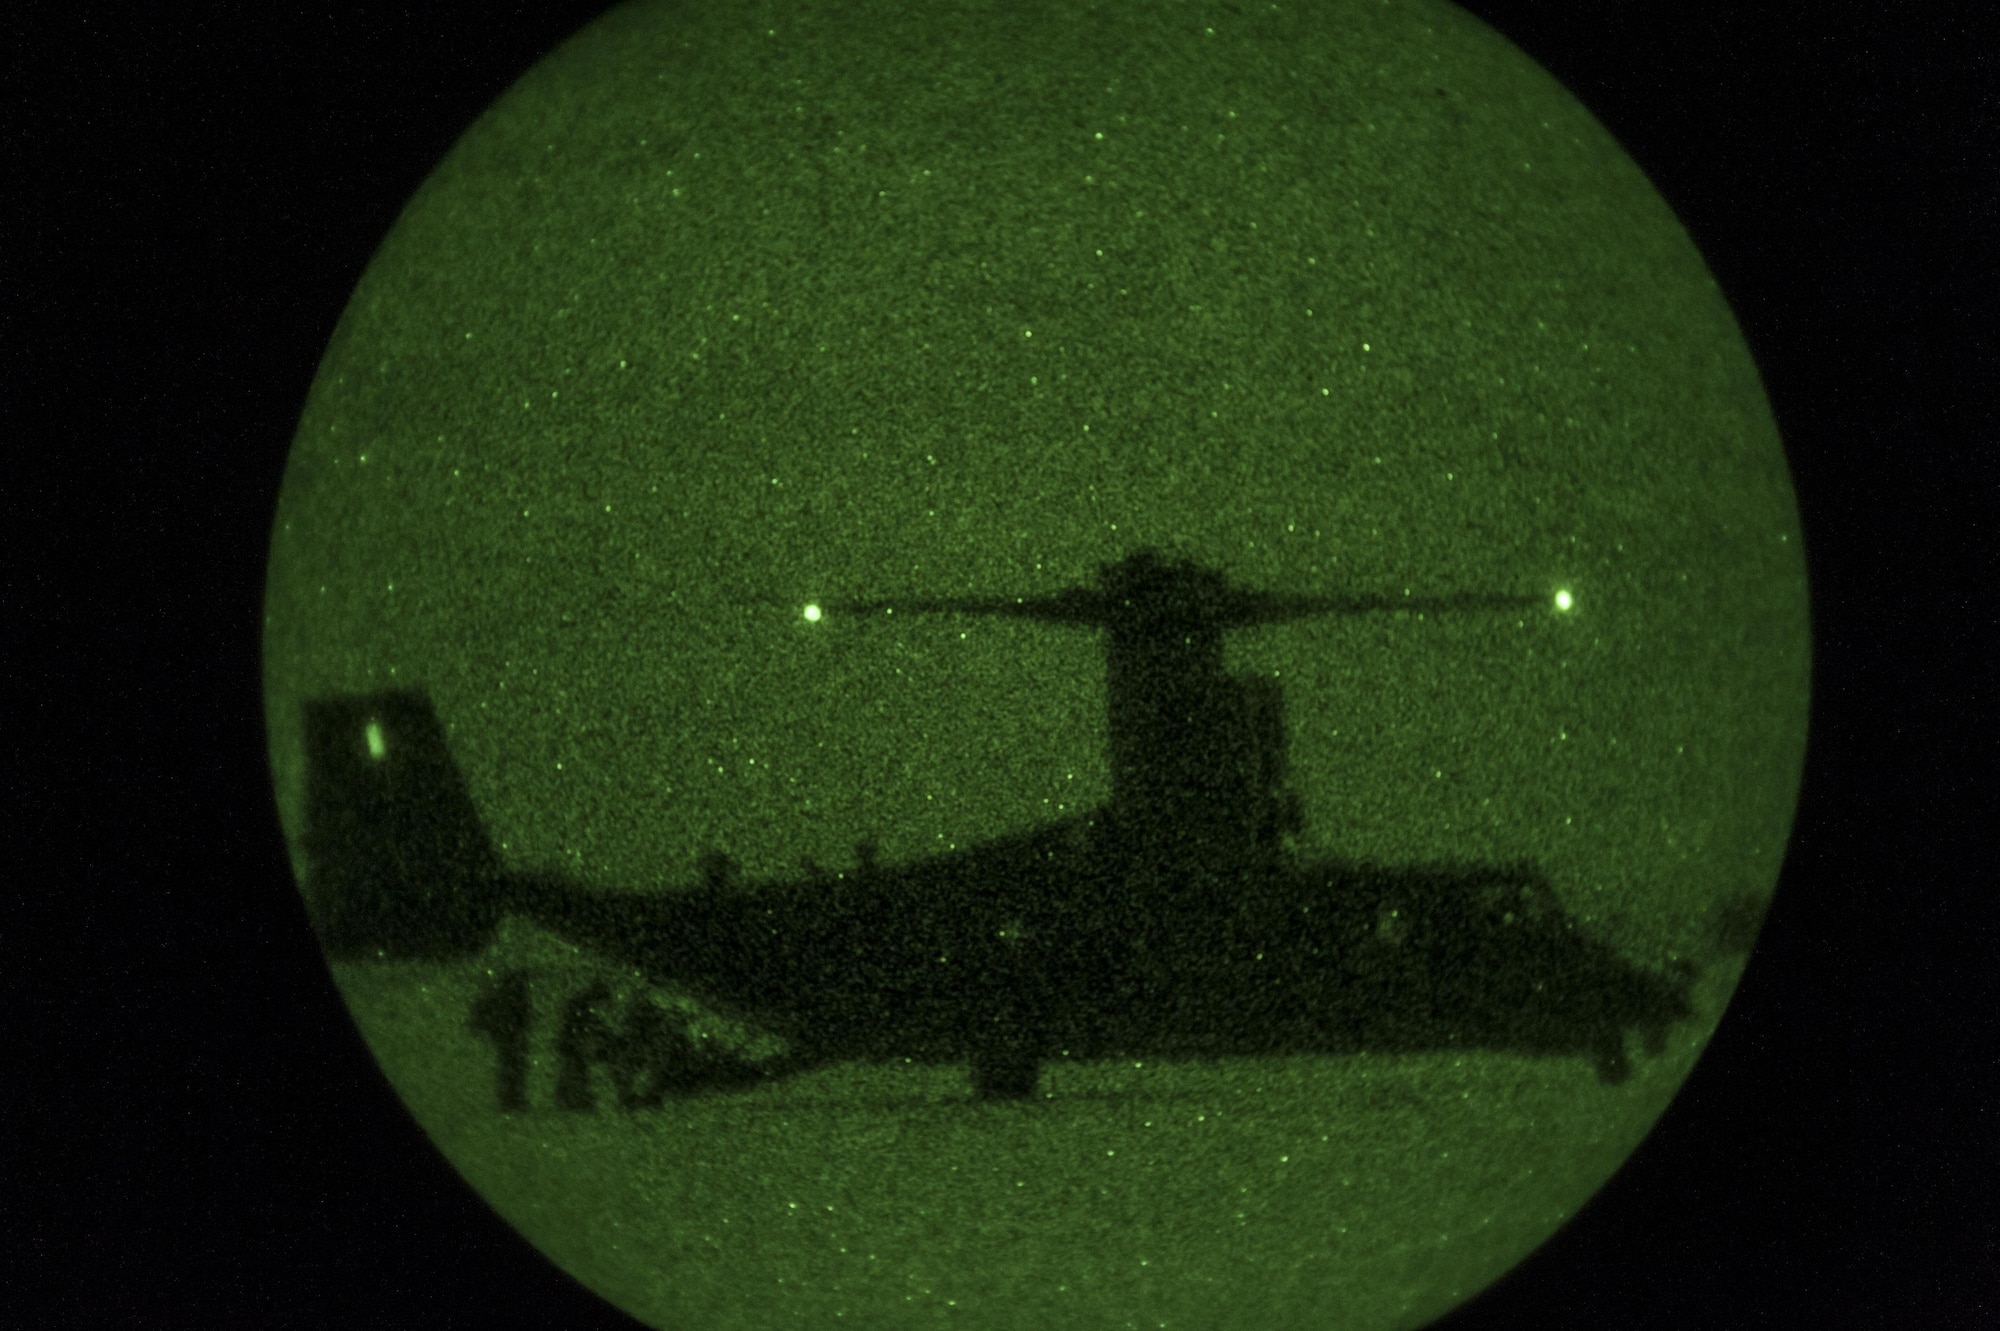 Special Tactics Airmen assigned to the 26th Special Tactics Squadron load onto a CV-22 Osprey during a personnel recovery mission as part of a Full Mission Profile exercise at White Sands Missile Range, N.M., Oct. 12, 2016.  The FMP was utilized to integrate special operations forces and foster tactical maturity through deliberate planning and execution of a force projection package and enable Special Tactics Airmen pre-deployment evaluation. (U.S. Air Force photo by Tech. Sgt. Manuel J. Martinez)